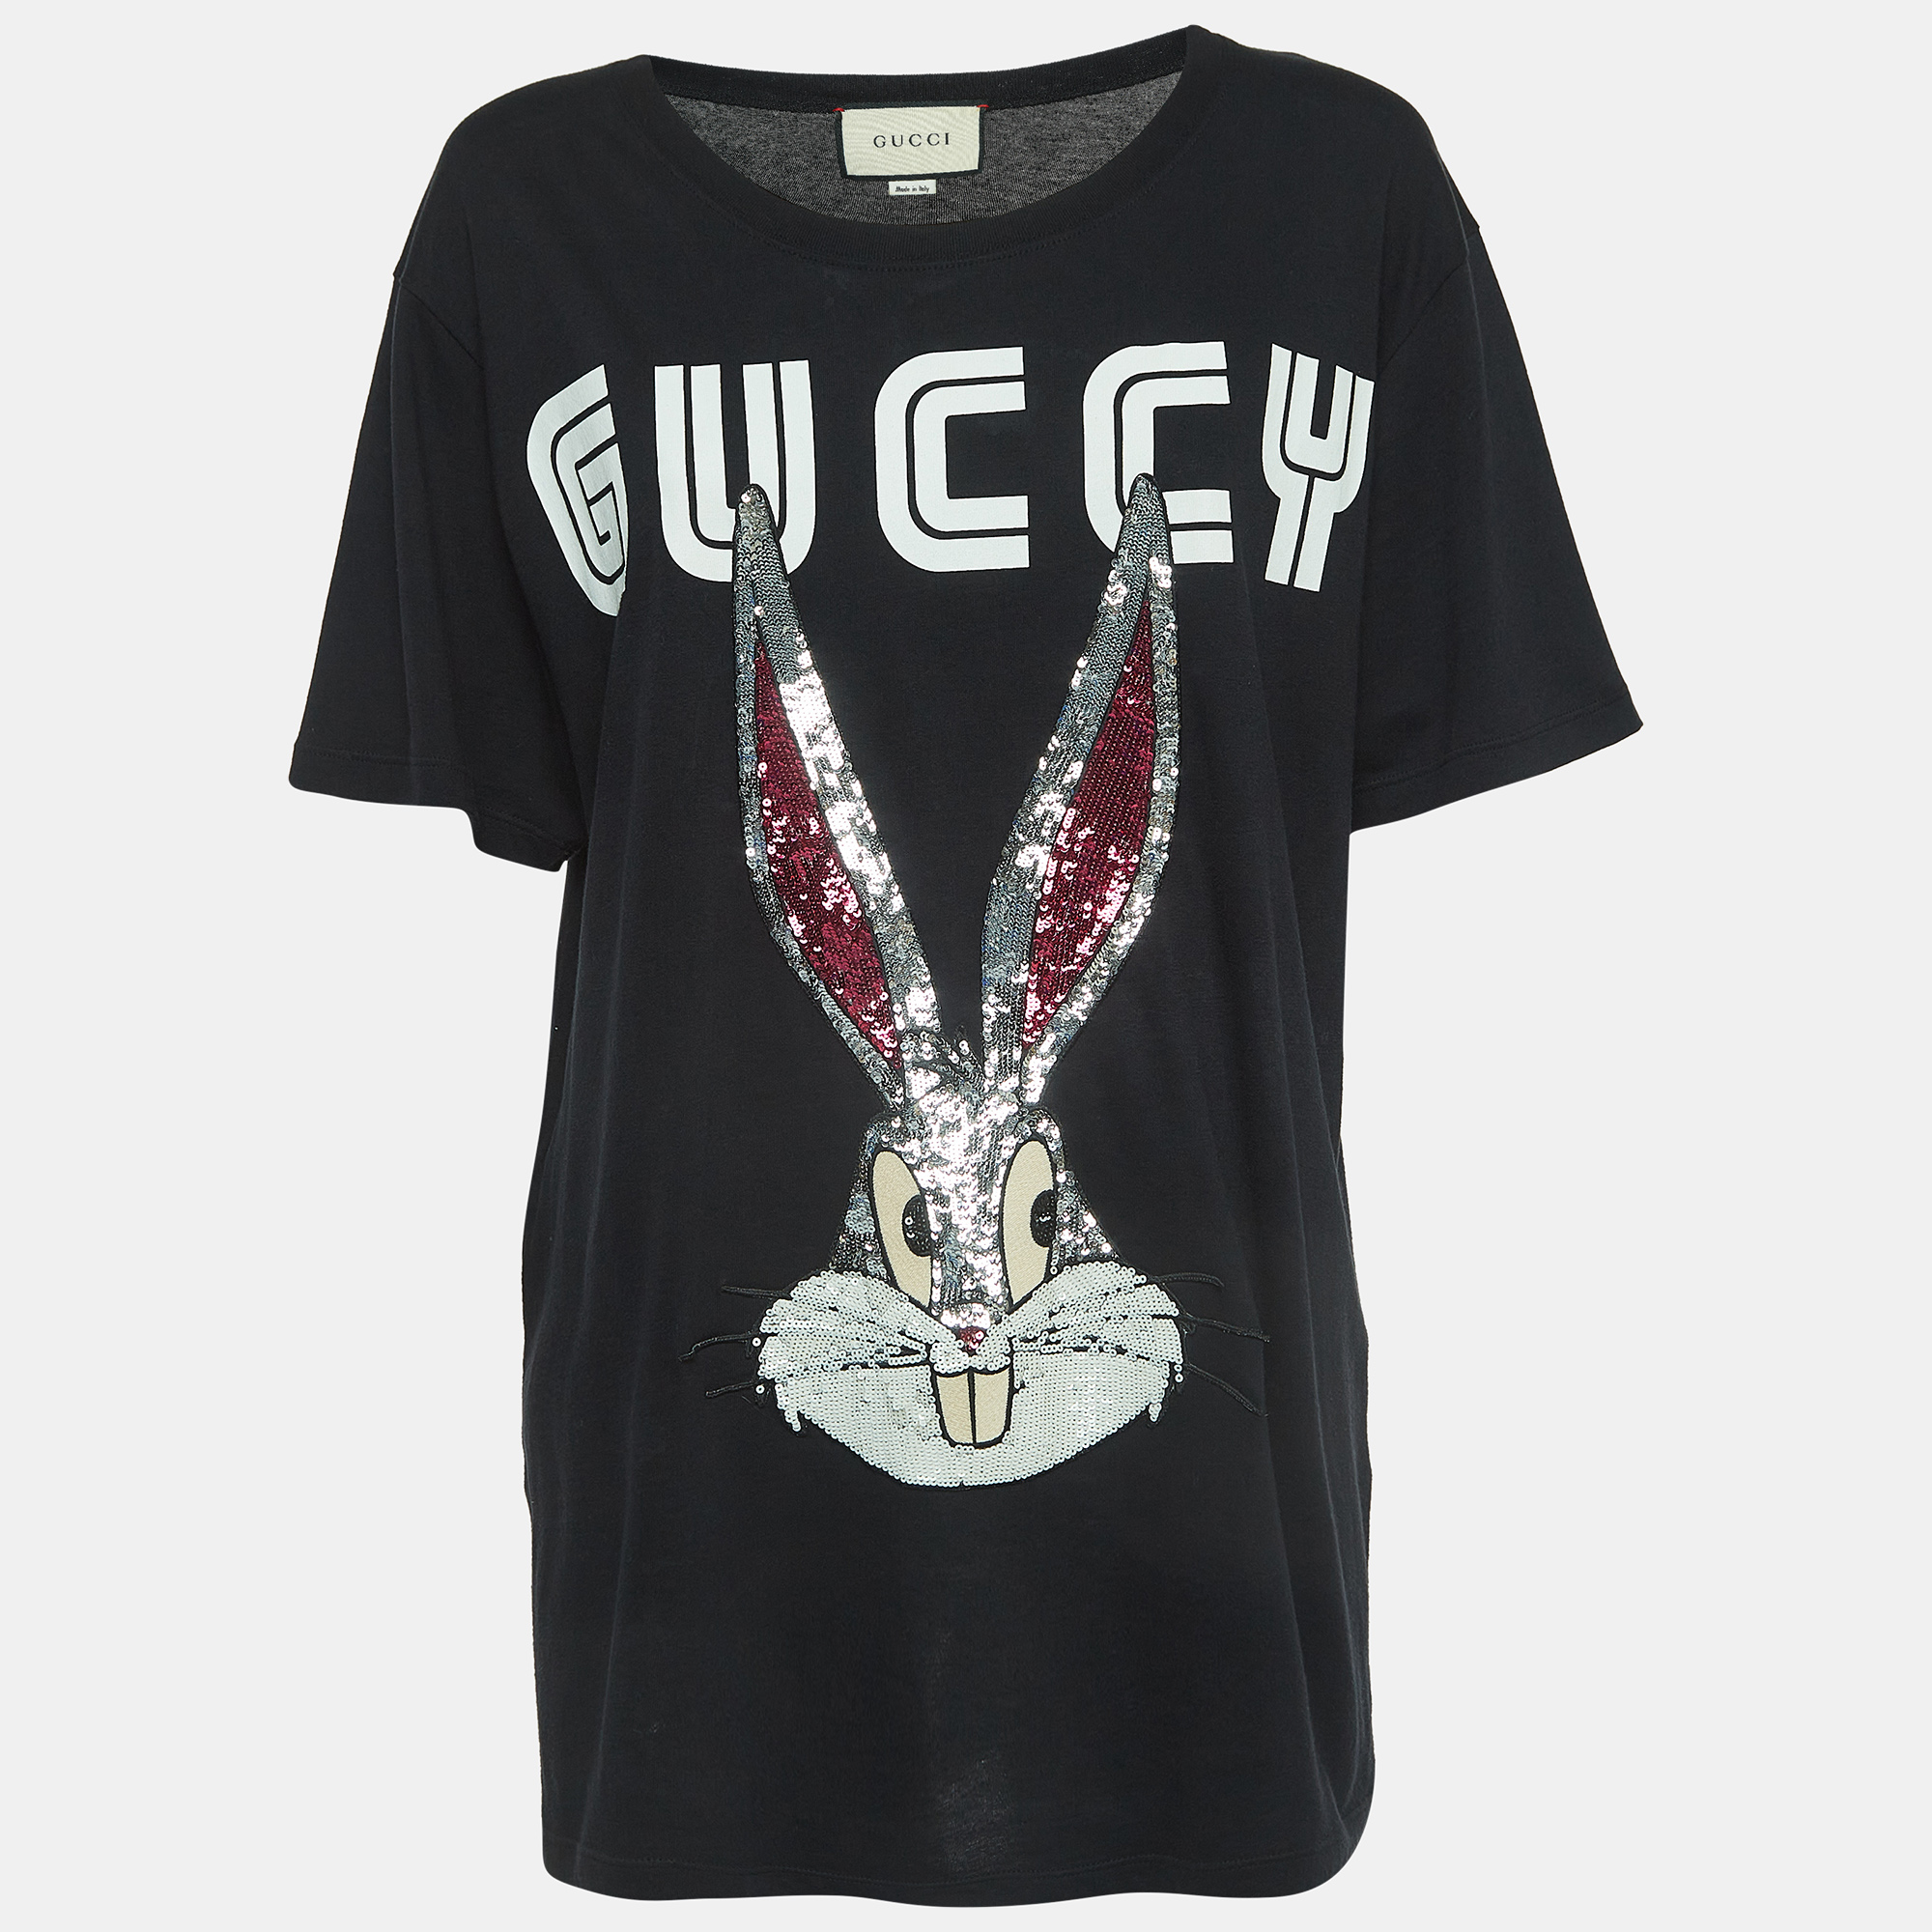 Pre-owned Gucci Black Printed Sequin Embellished Cotton T-shirt M